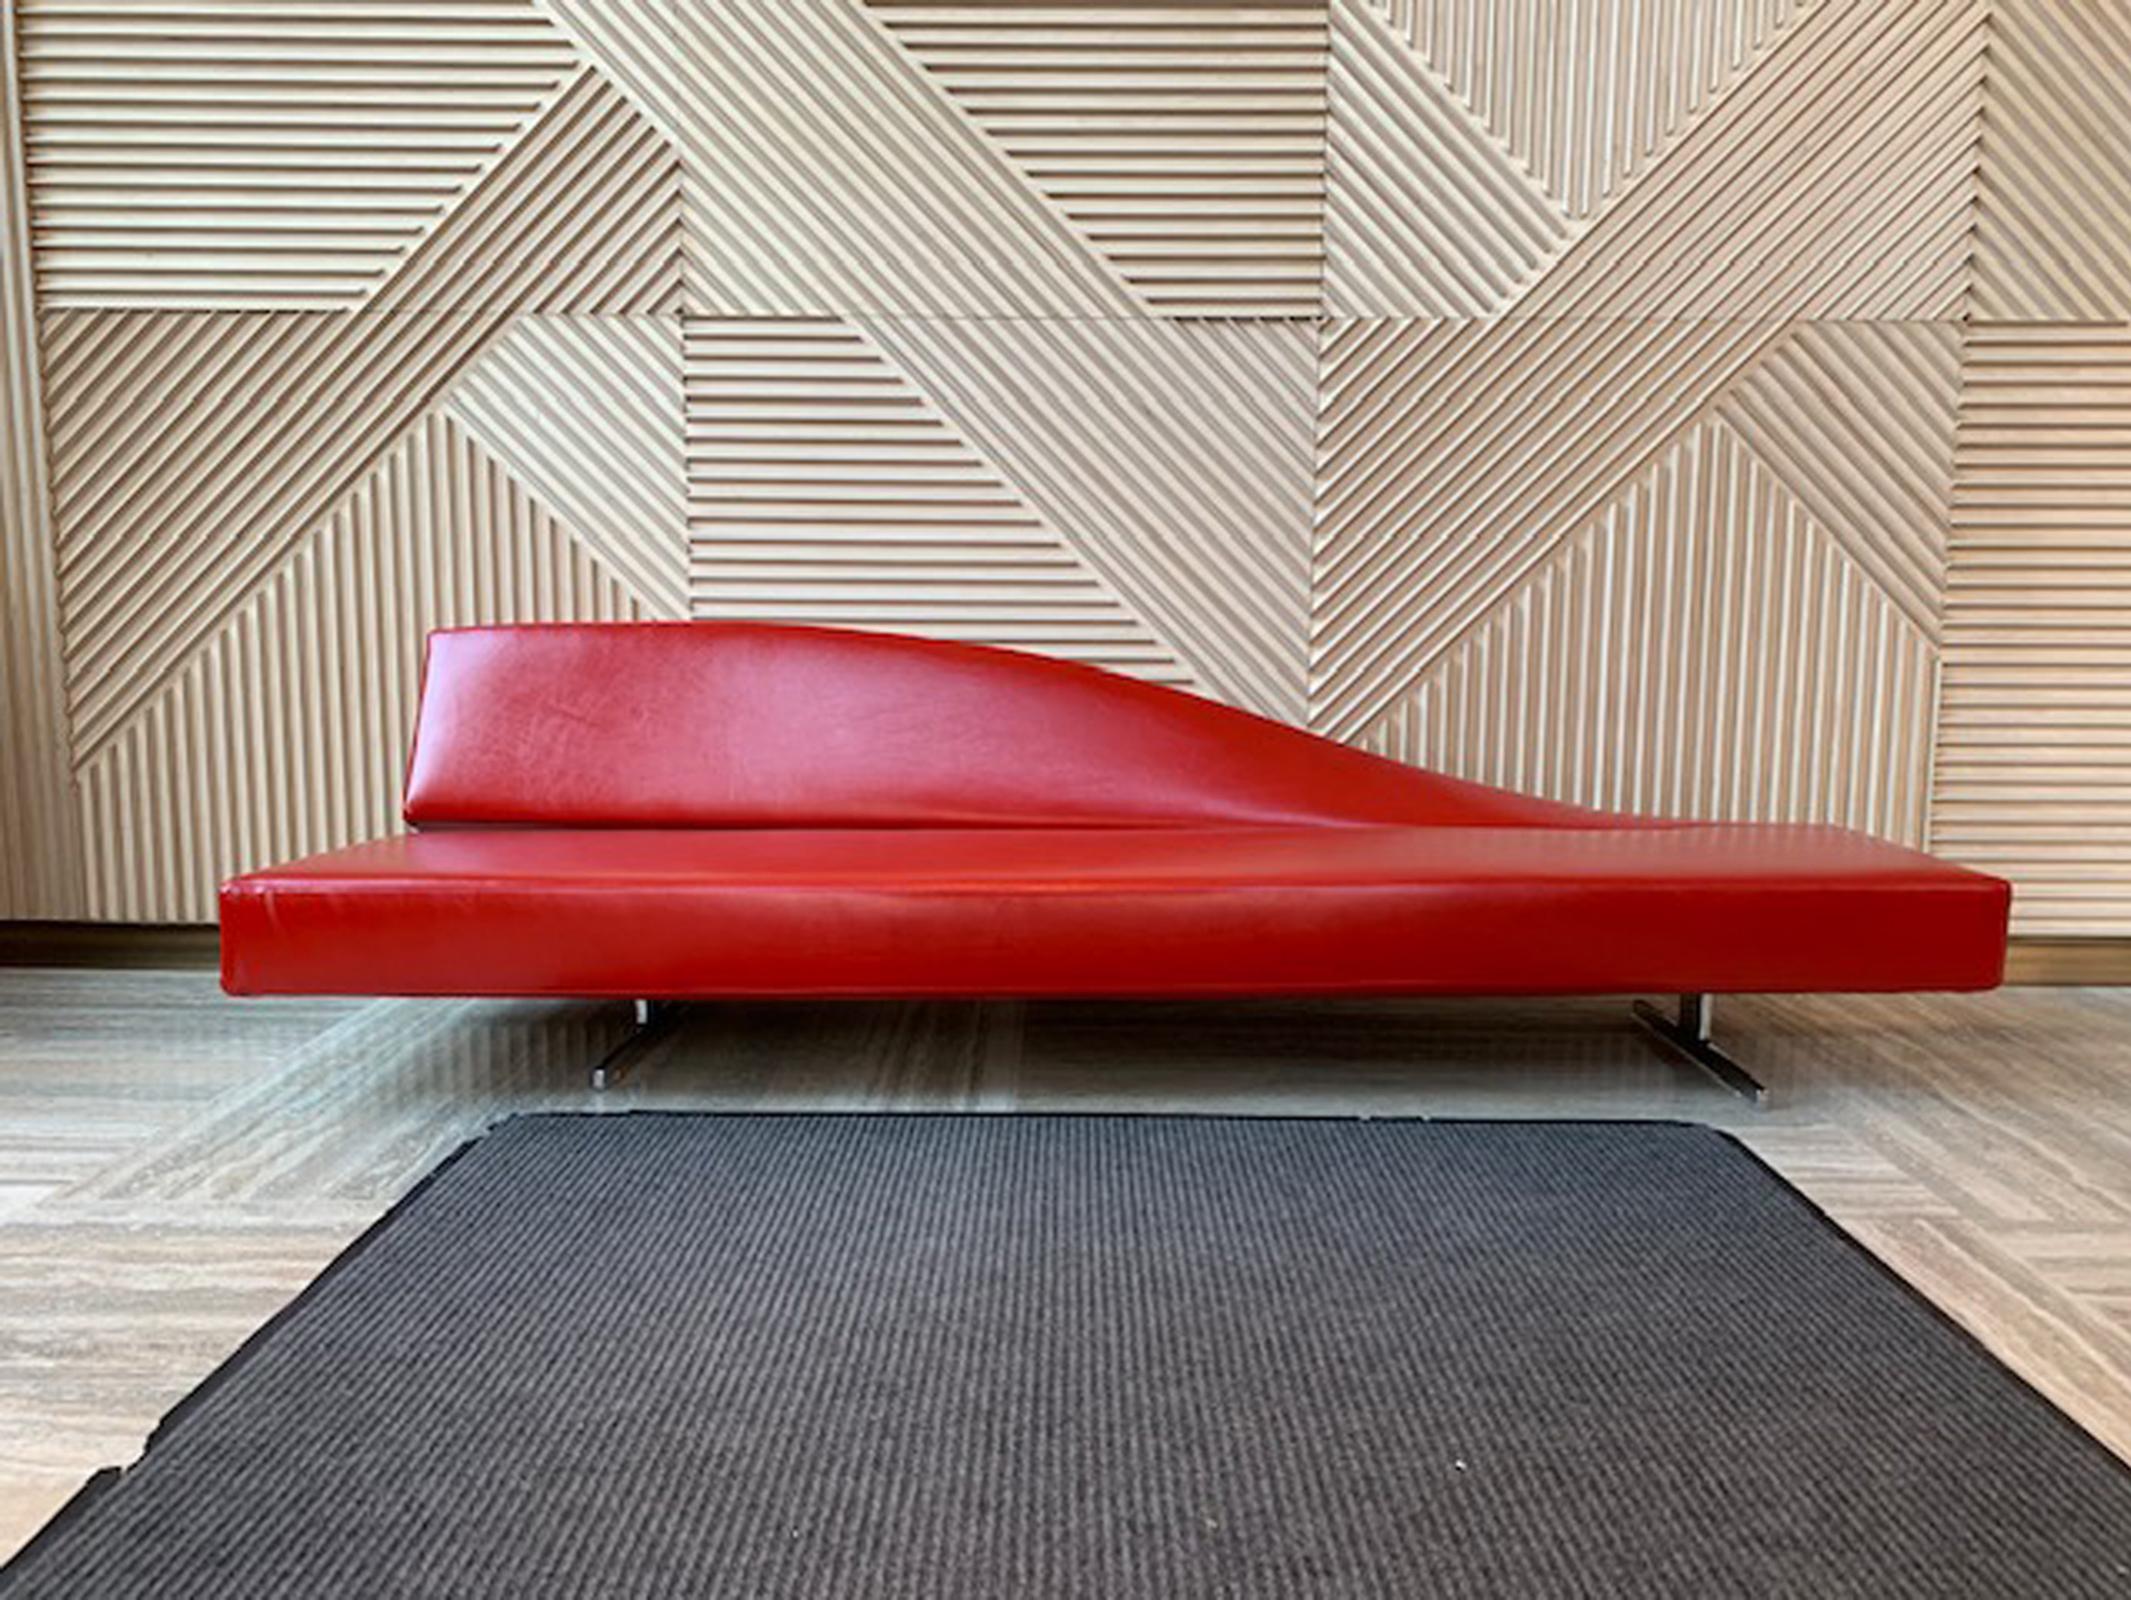 Designed by Jean Marie Massaud, the dramatically sloping back of the Aspen sofa/bench has a horizontal twist, and seat depth is tapered to complement the back. It makes an elegant statement in community spaces, waiting areas, galleries, and lobbies.